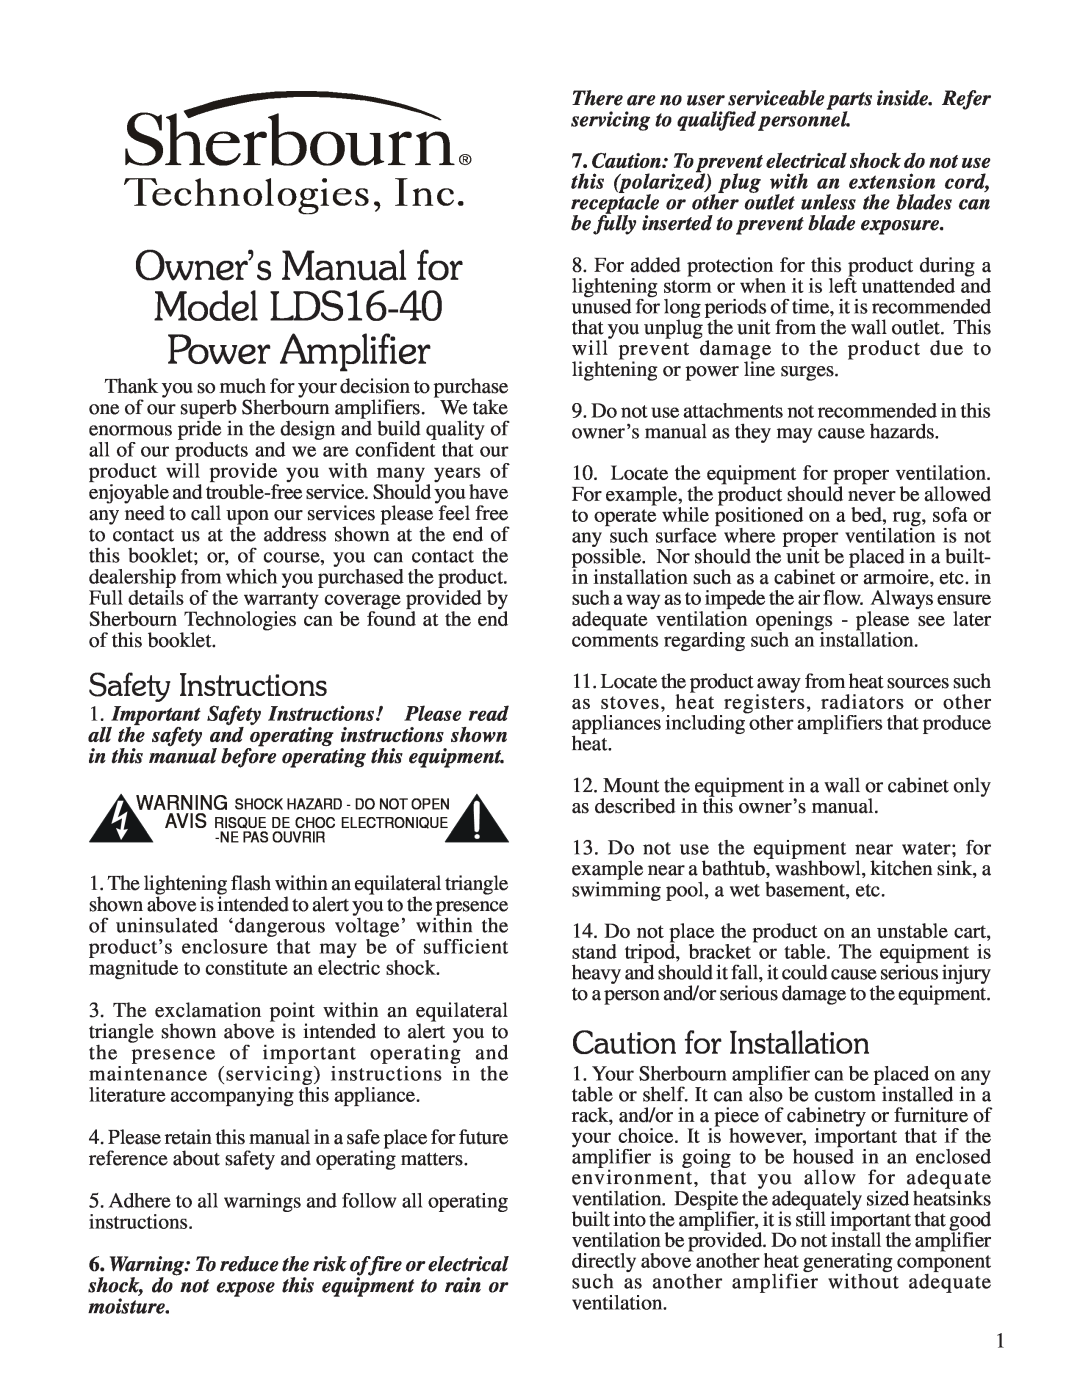 Sherbourn Technologies LDS16-40 owner manual Safety Instructions, Caution for Installation, Sherbourn, Technologies, Inc 